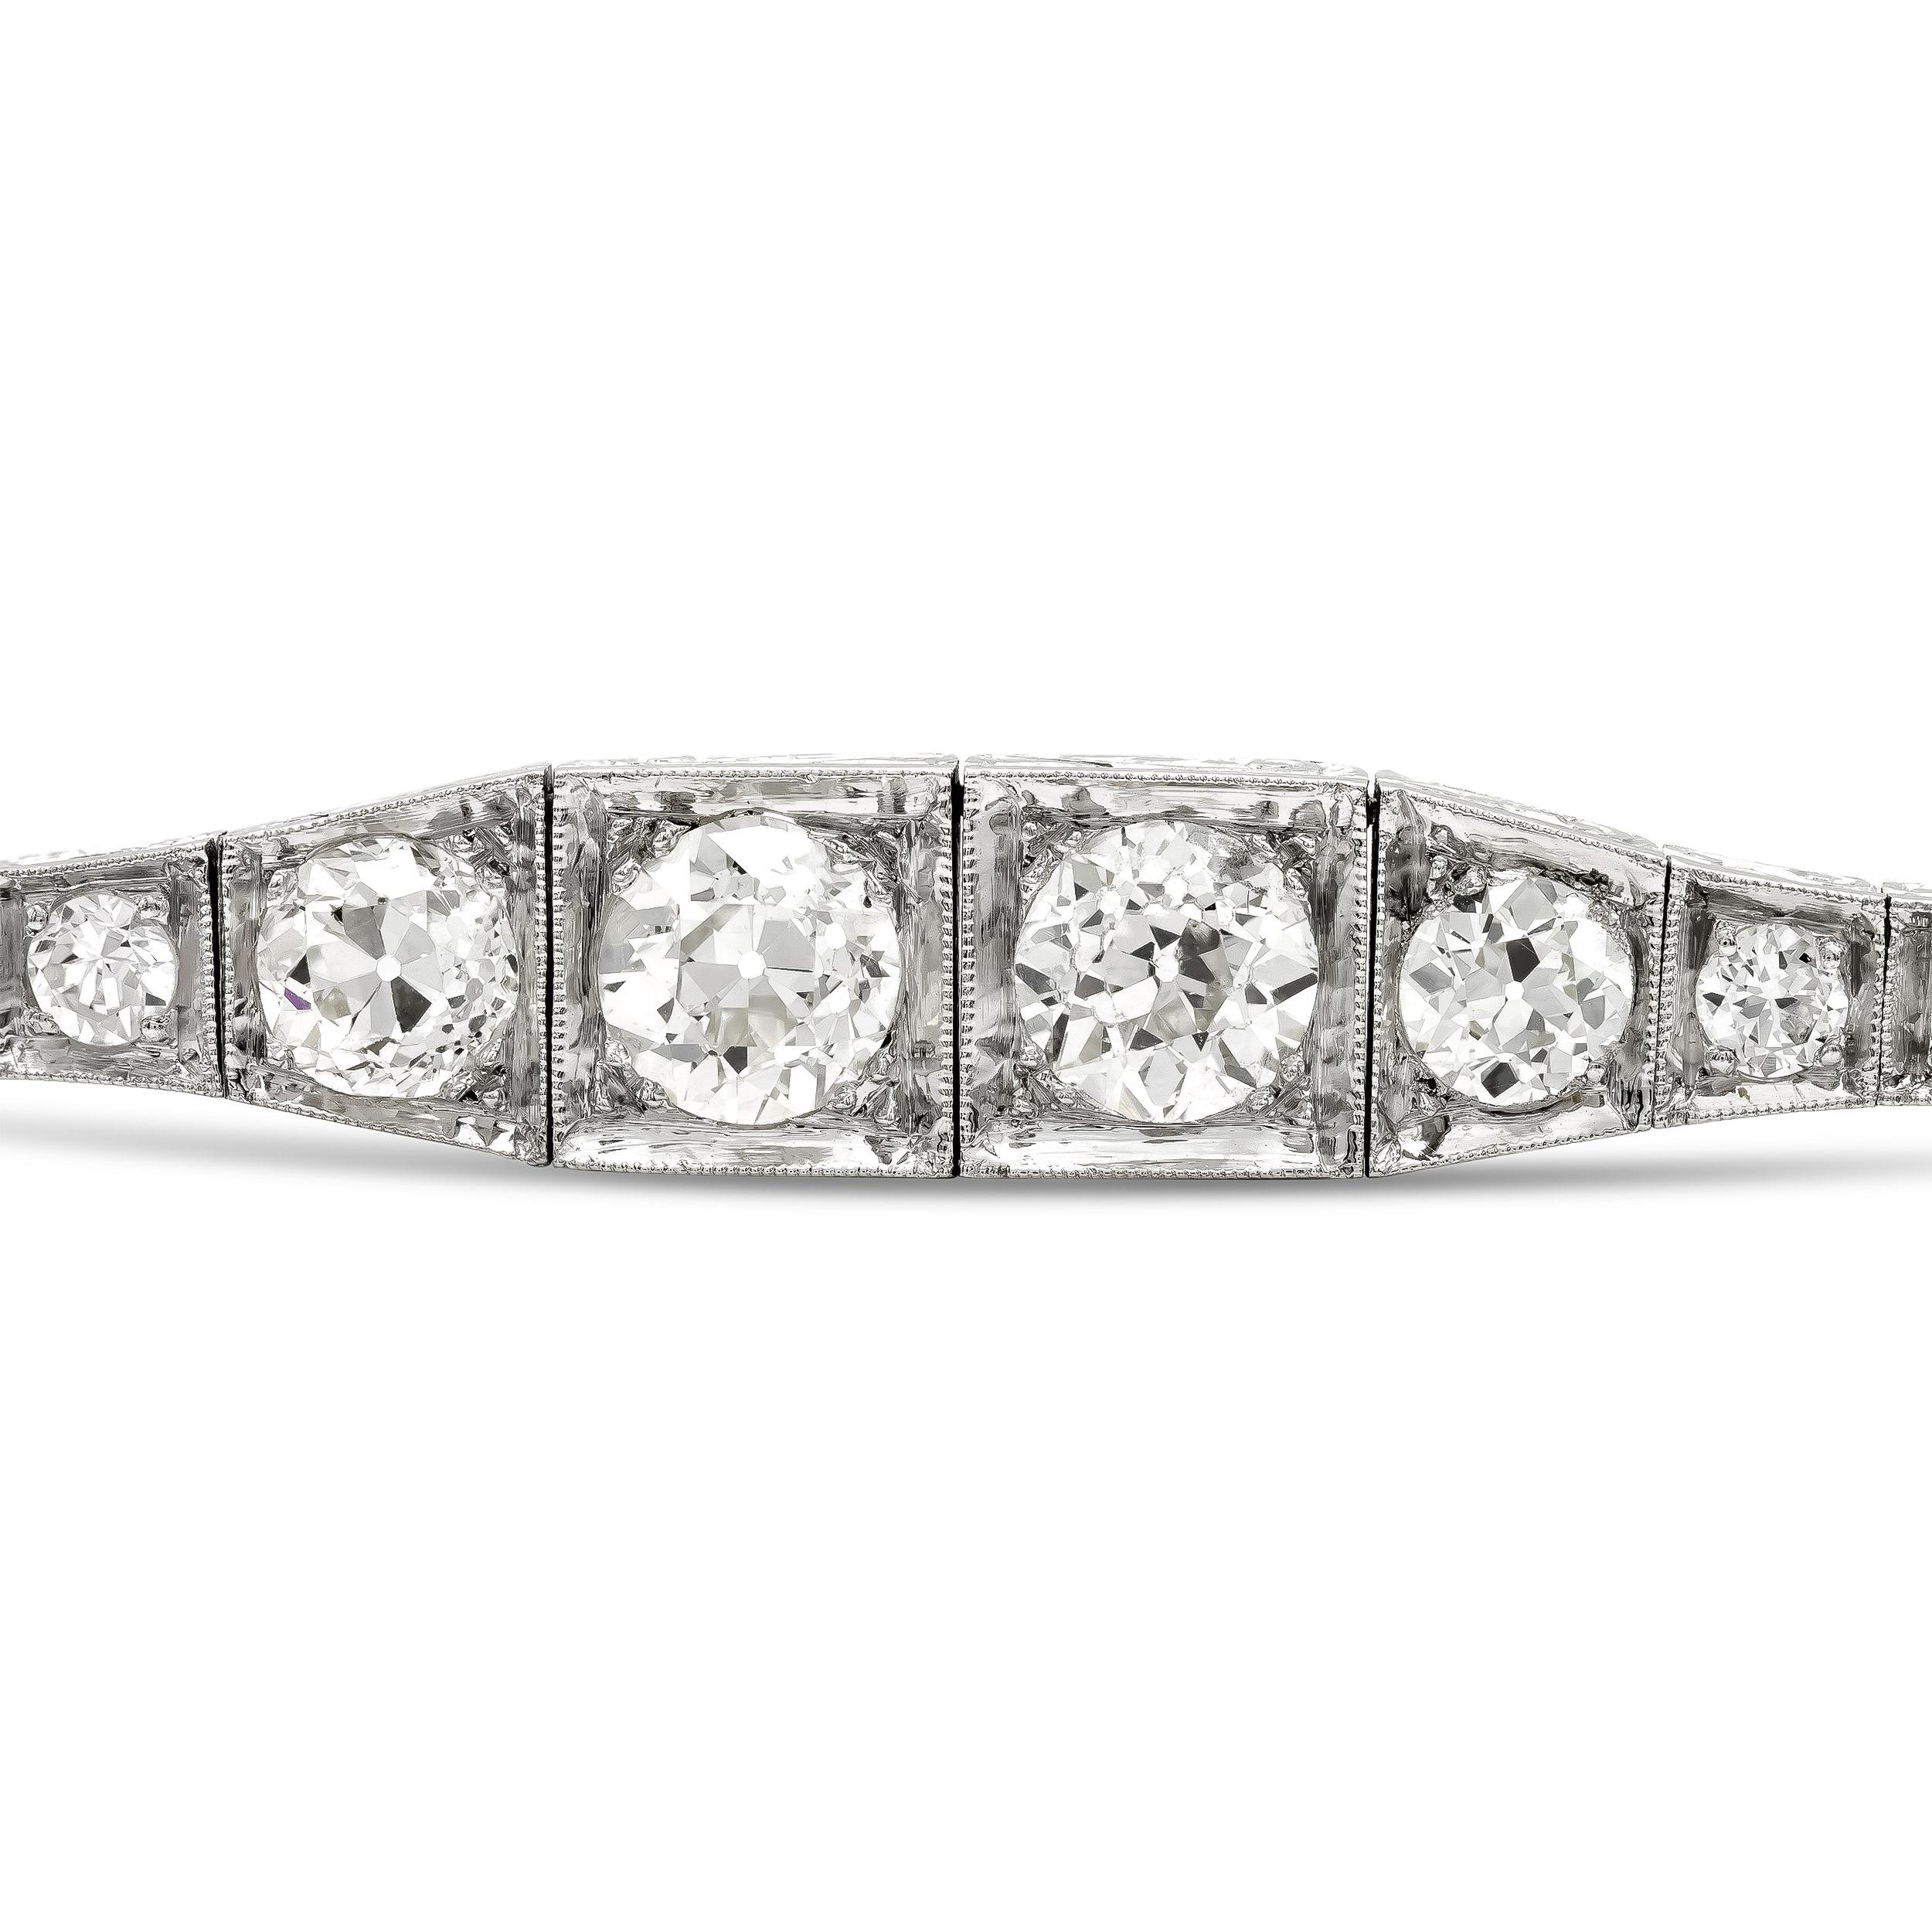 Arm yourself in style with this sophisticated and timeless Art Deco diamond line bracelet. She shimmers from end-to-end with 38 icy-white old European diamonds, that graduate to two 1.01 ct. diamonds at the center. Meticulously finished in platinum